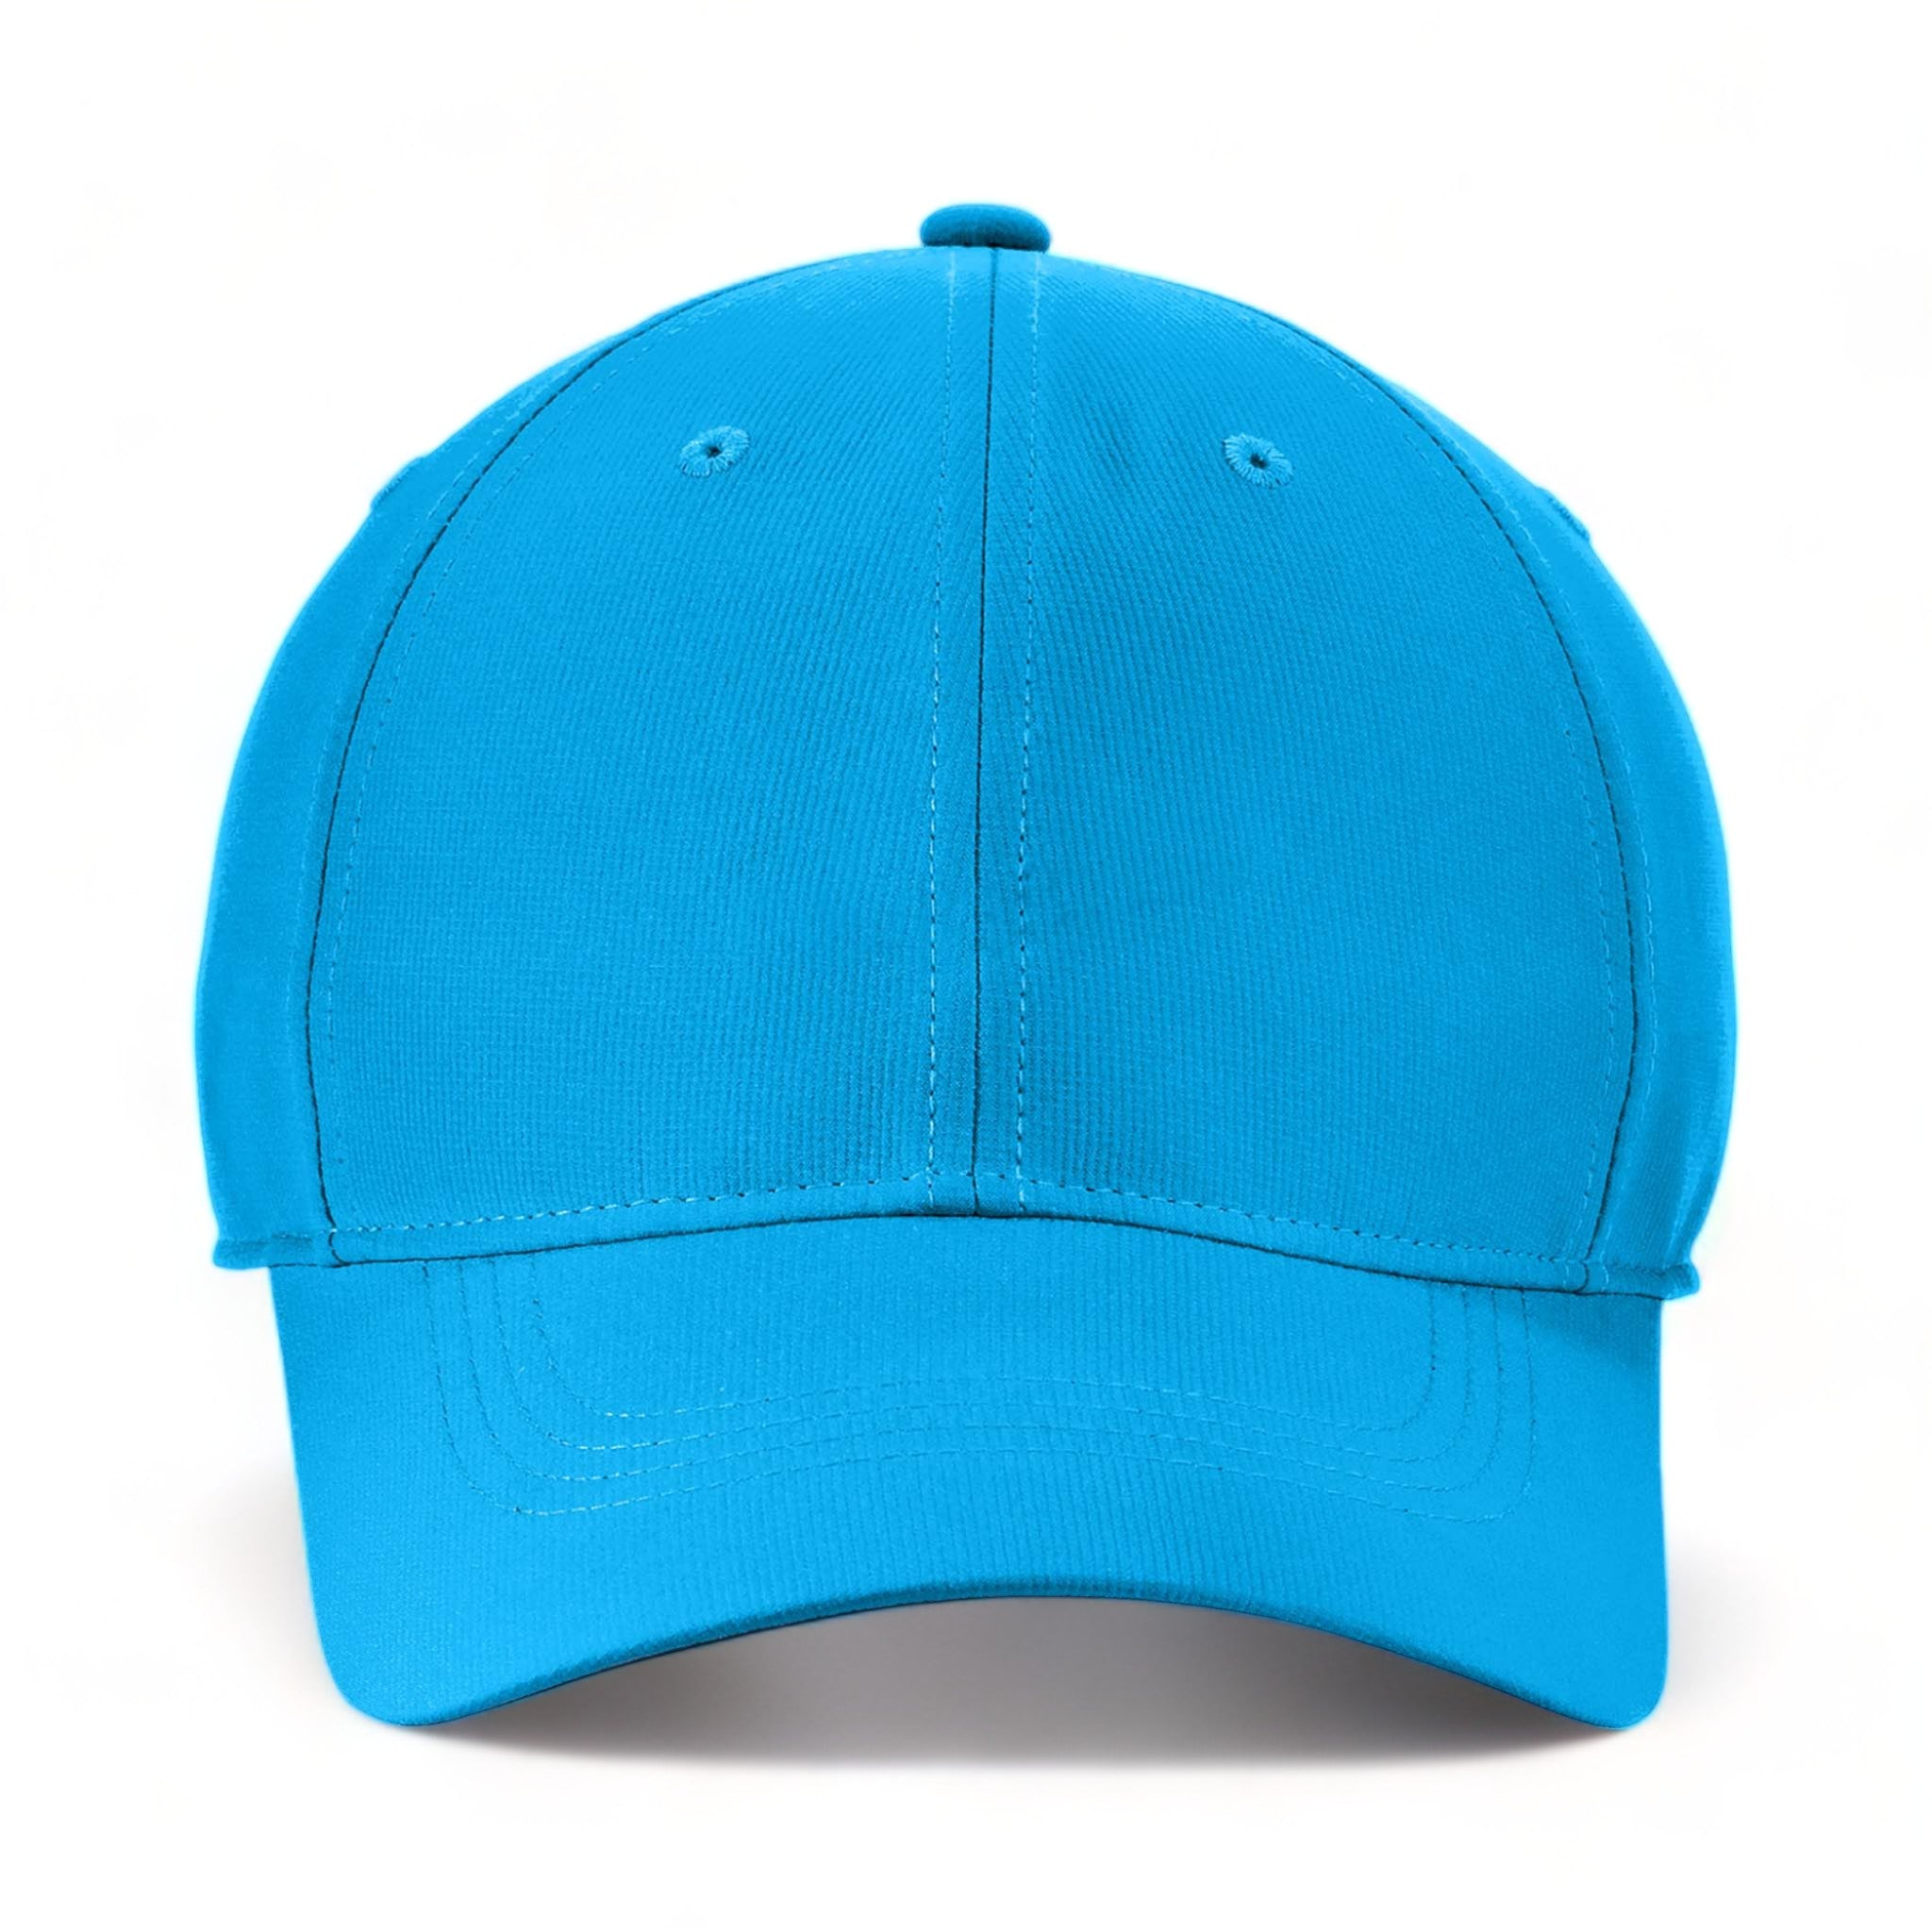 Front view of Nike NKFB6444 custom hat in photo blue